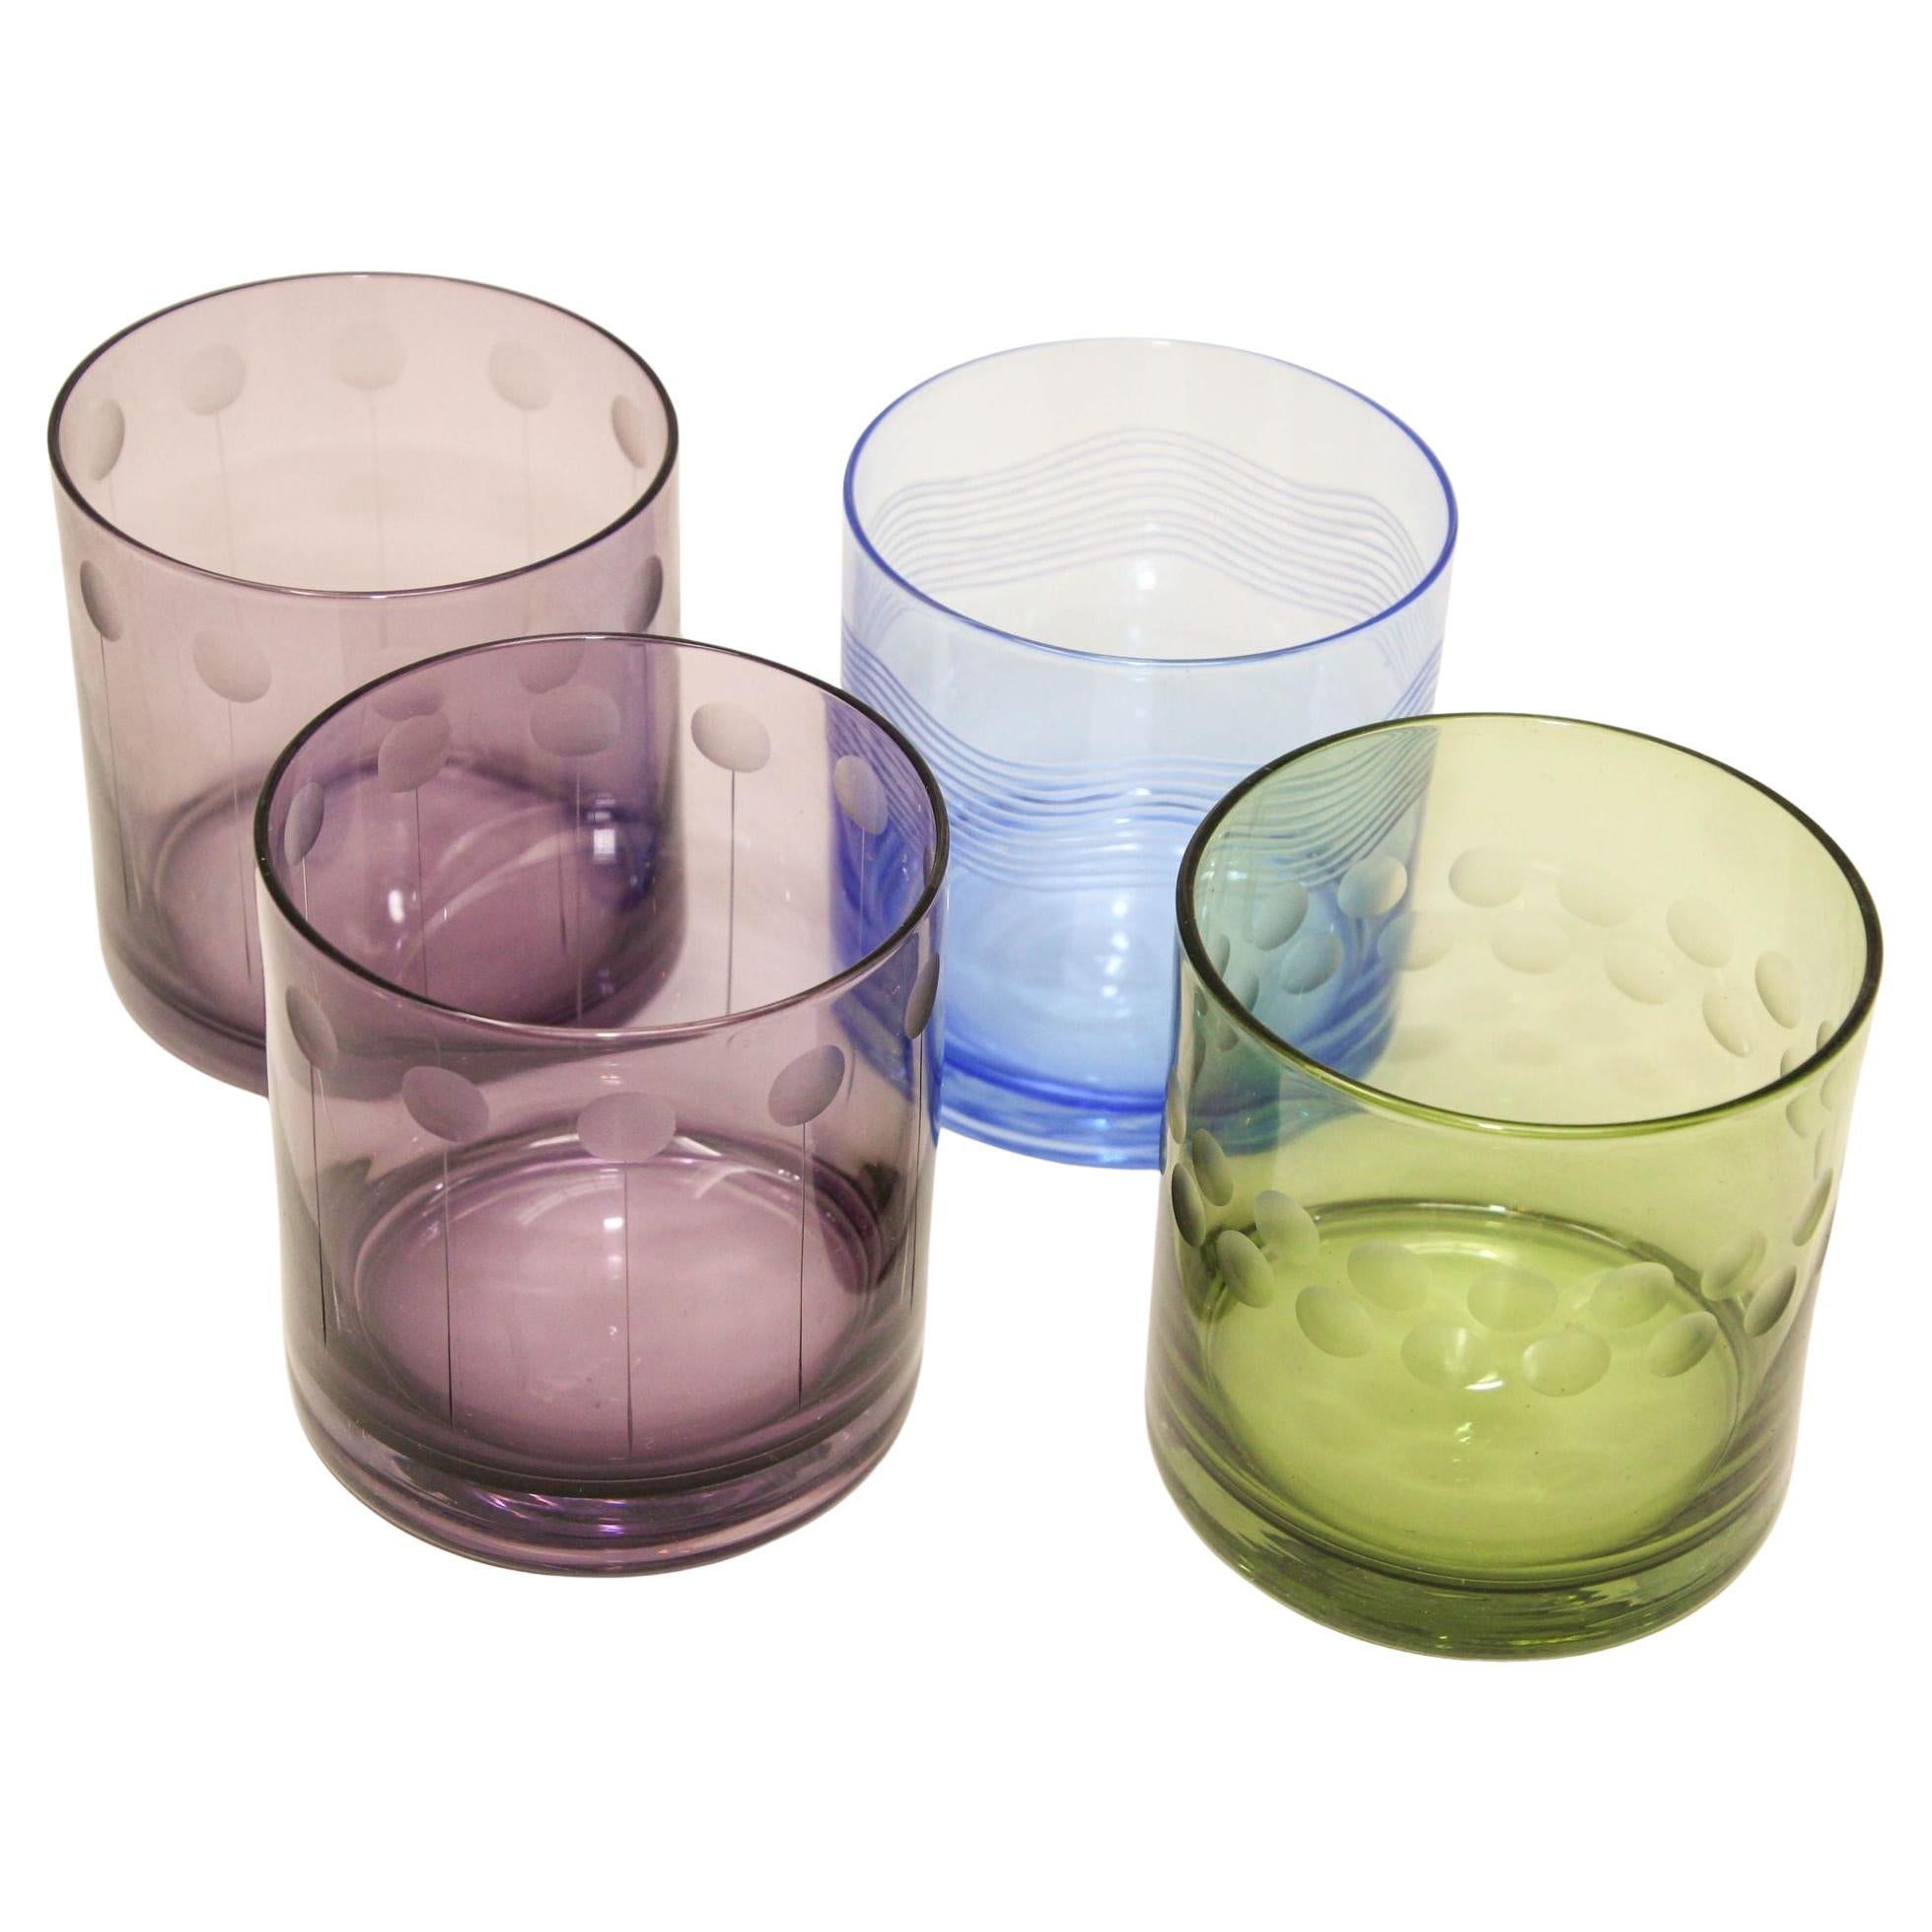 https://a.1stdibscdn.com/set-of-four-vintage-drinking-colored-crystal-glasses-with-etched-design-for-sale/f_9068/f_345934921685816247047/f_34593492_1685816247932_bg_processed.jpg